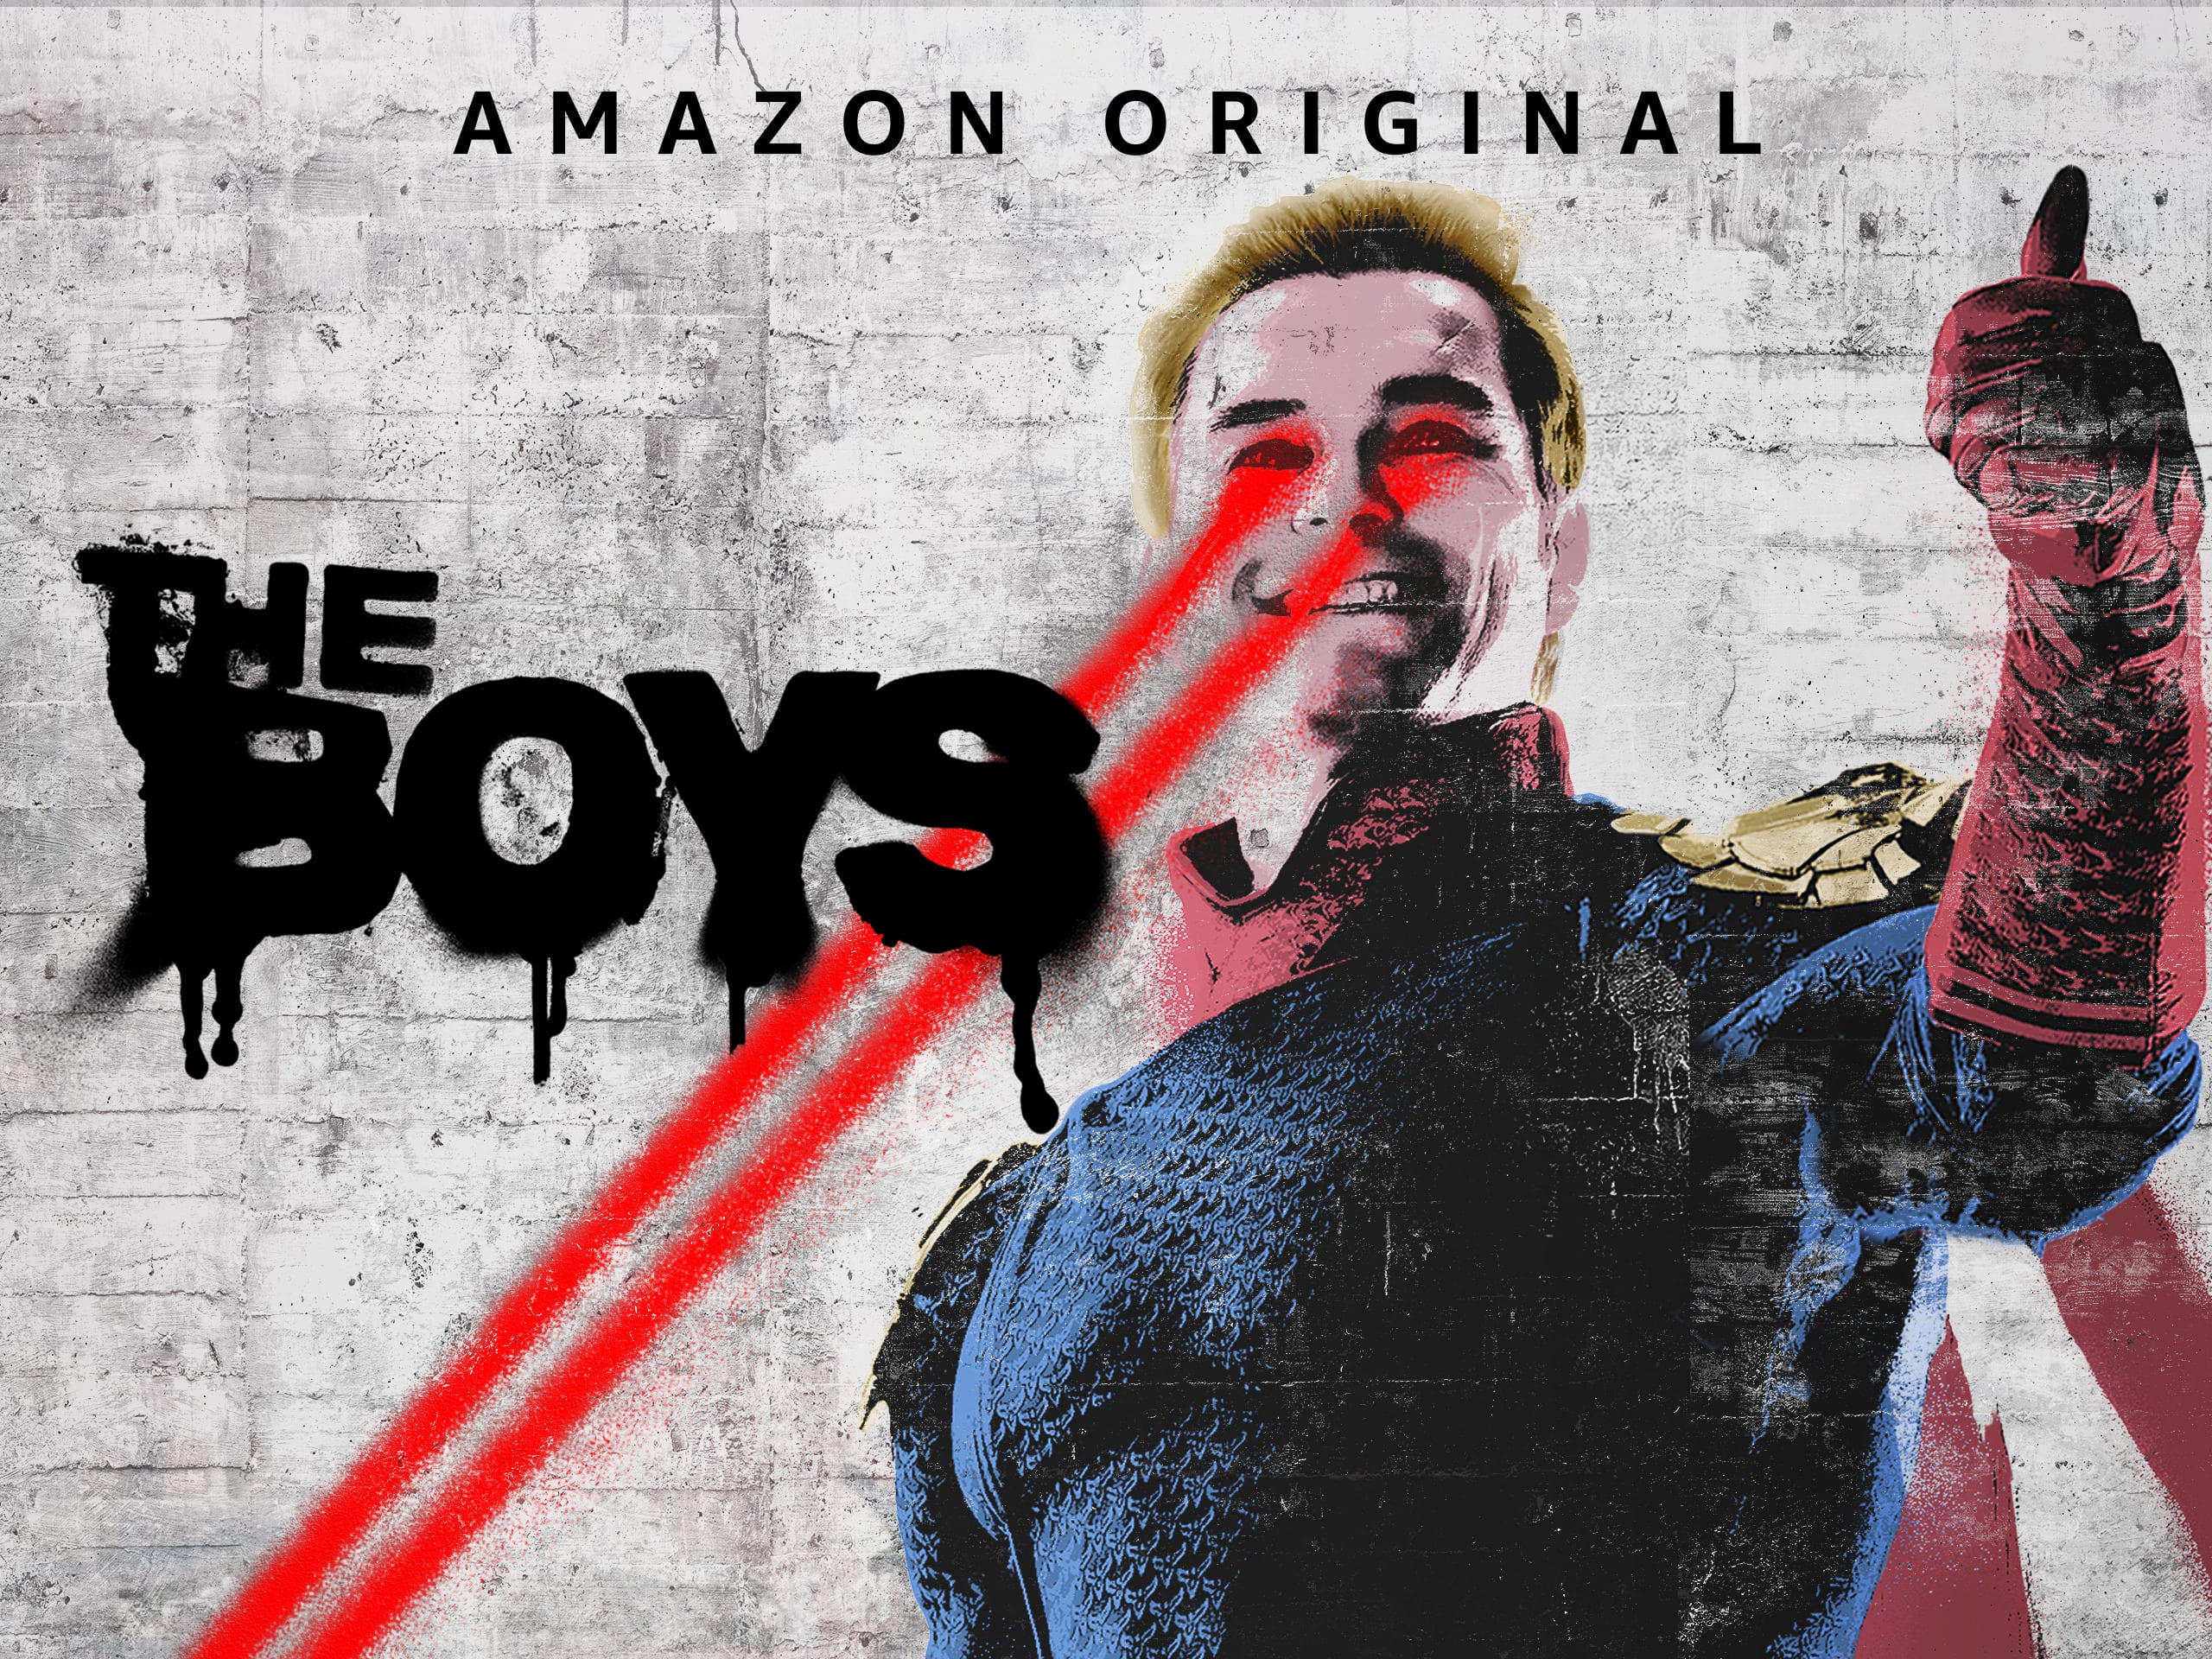 Other top shows: The Boys 